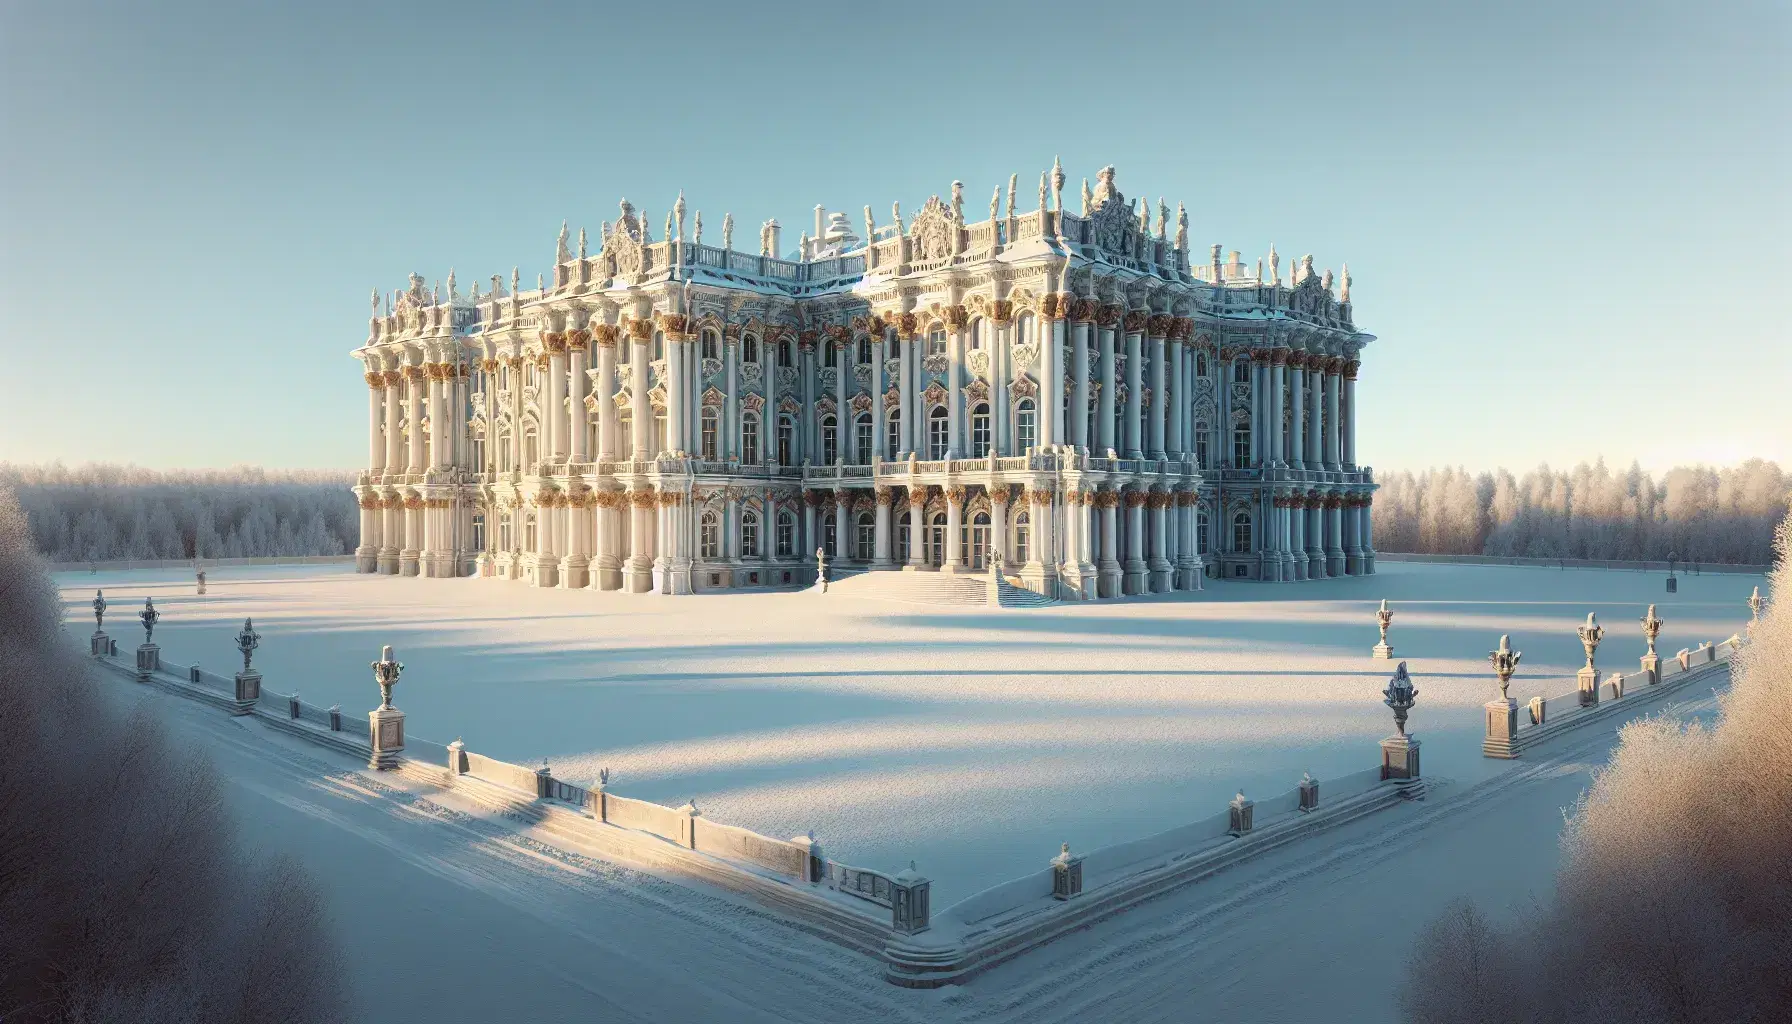 Winter Palace in Baroque style with ornate details, covered in snow under a clear blue sky, surrounded by a snowy courtyard and bare trees.